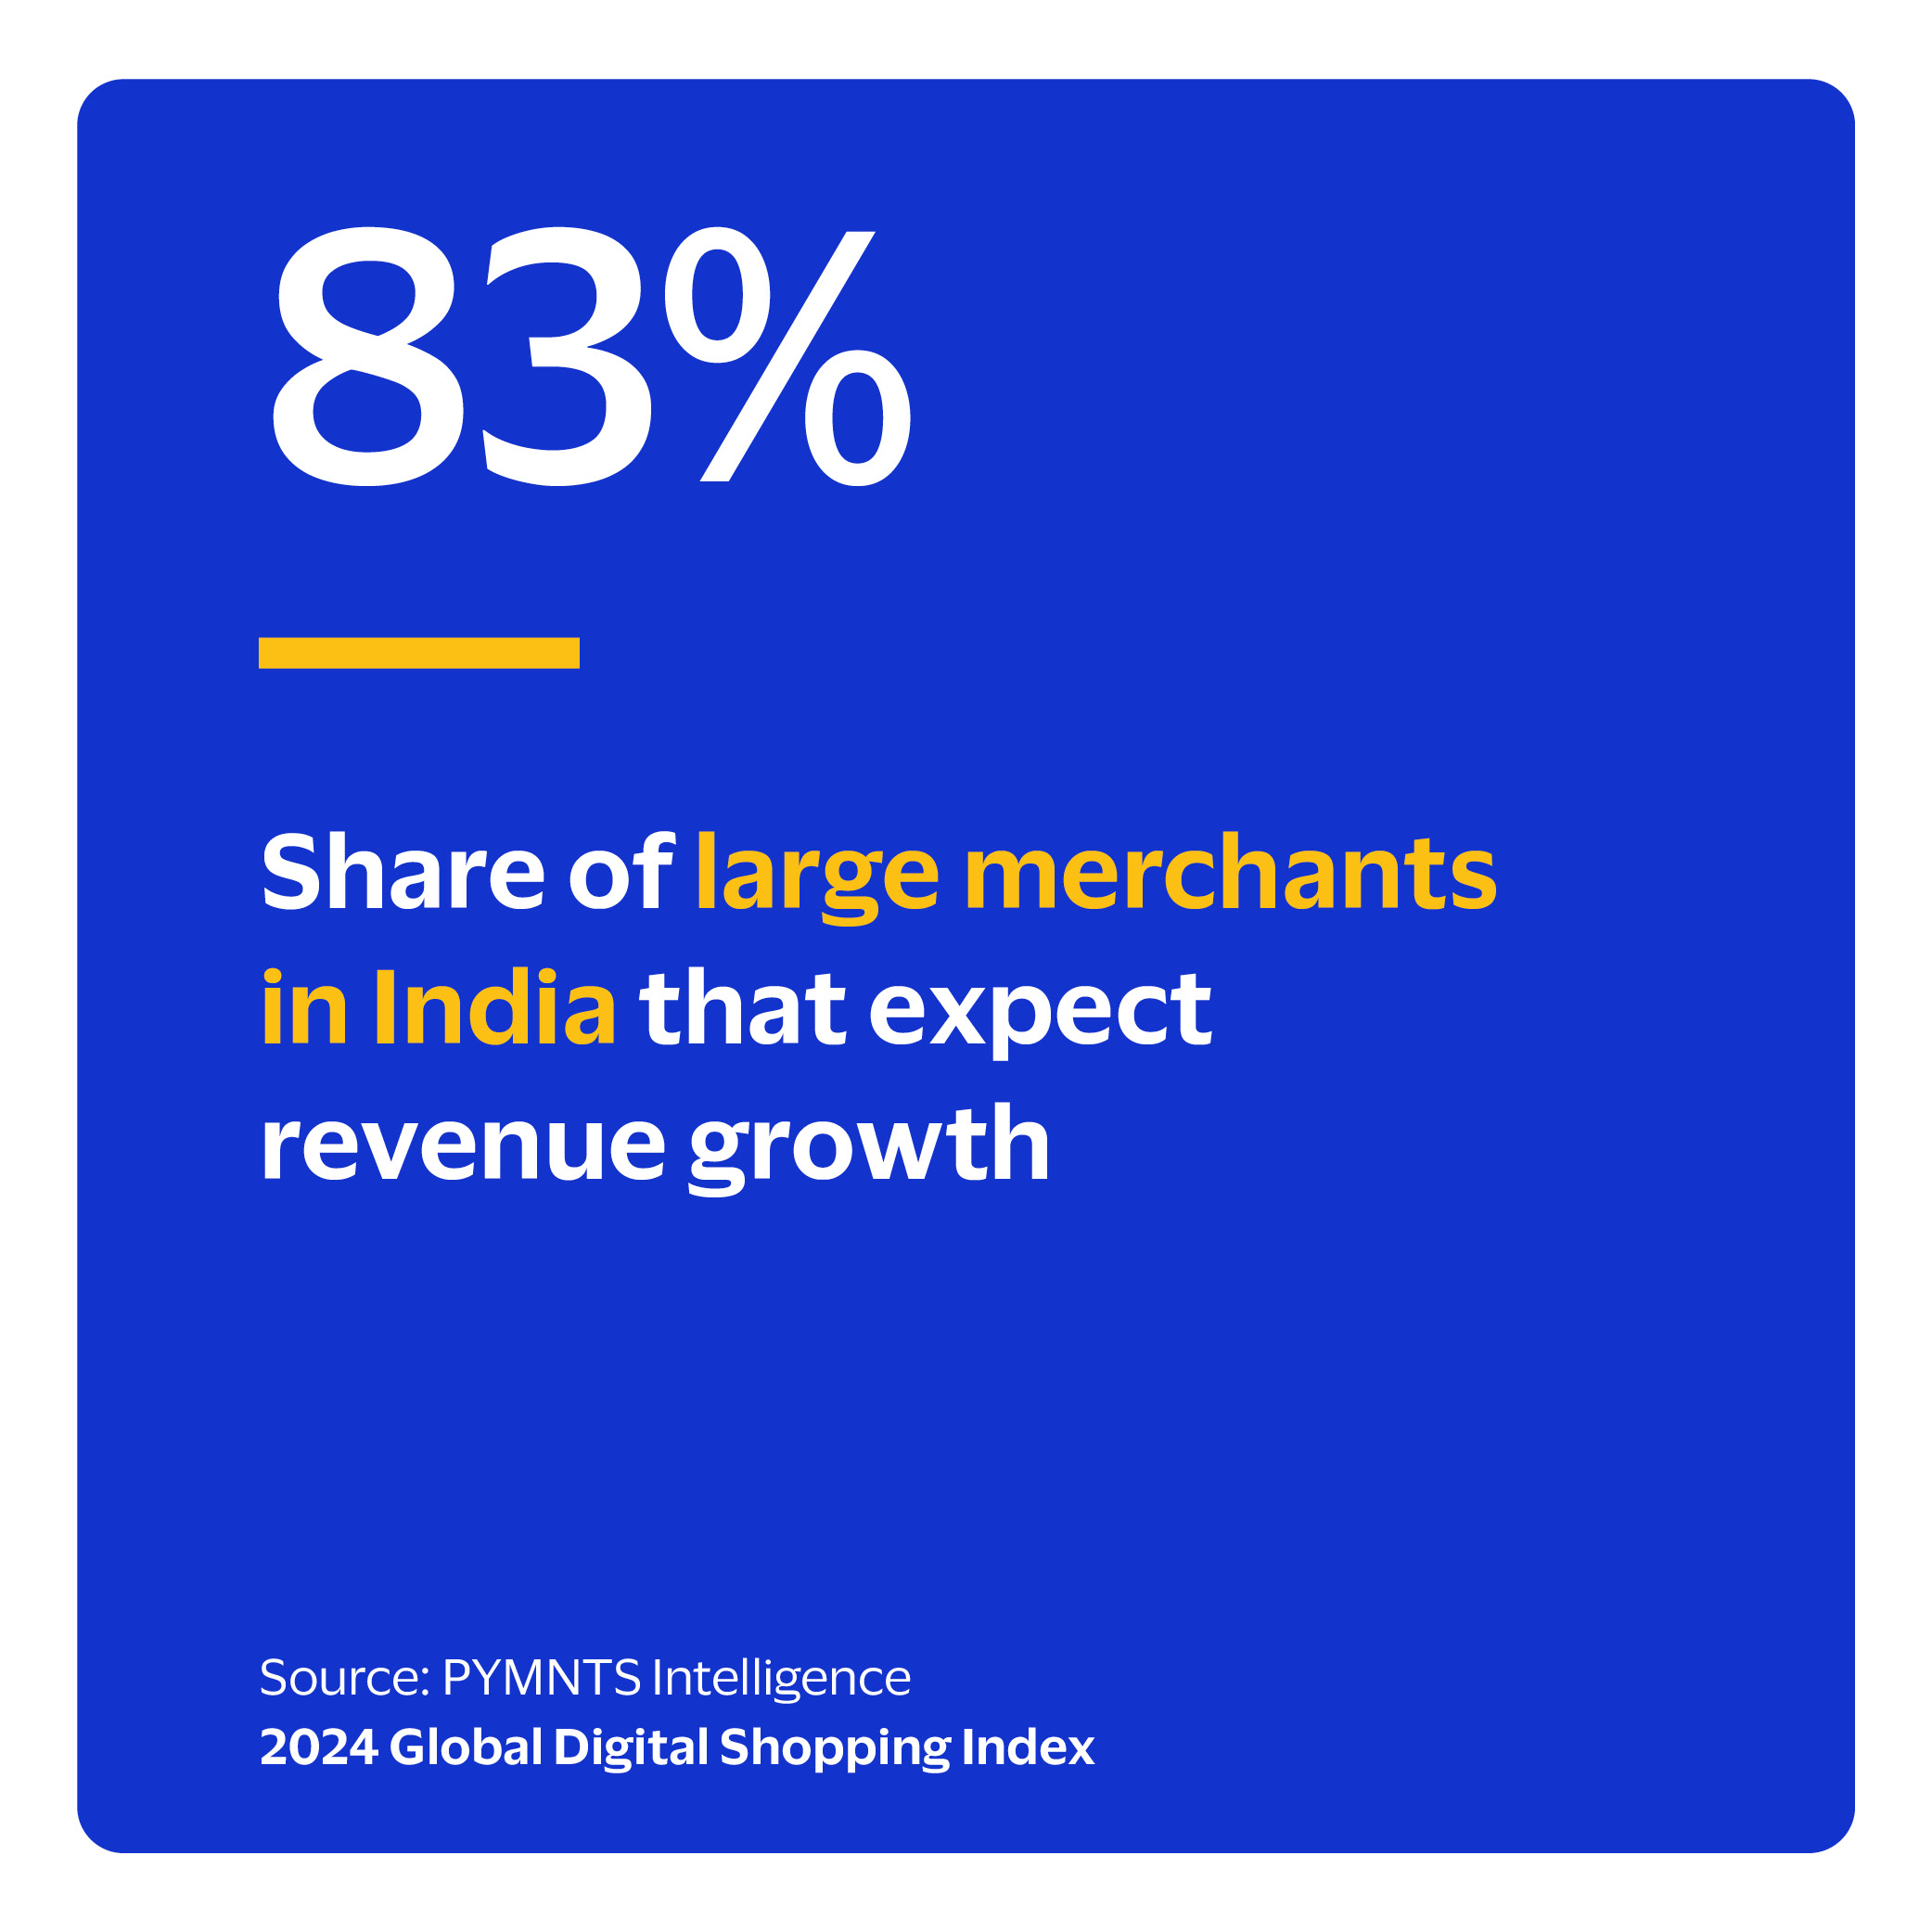  Share of large merchants in India that expect revenue growth